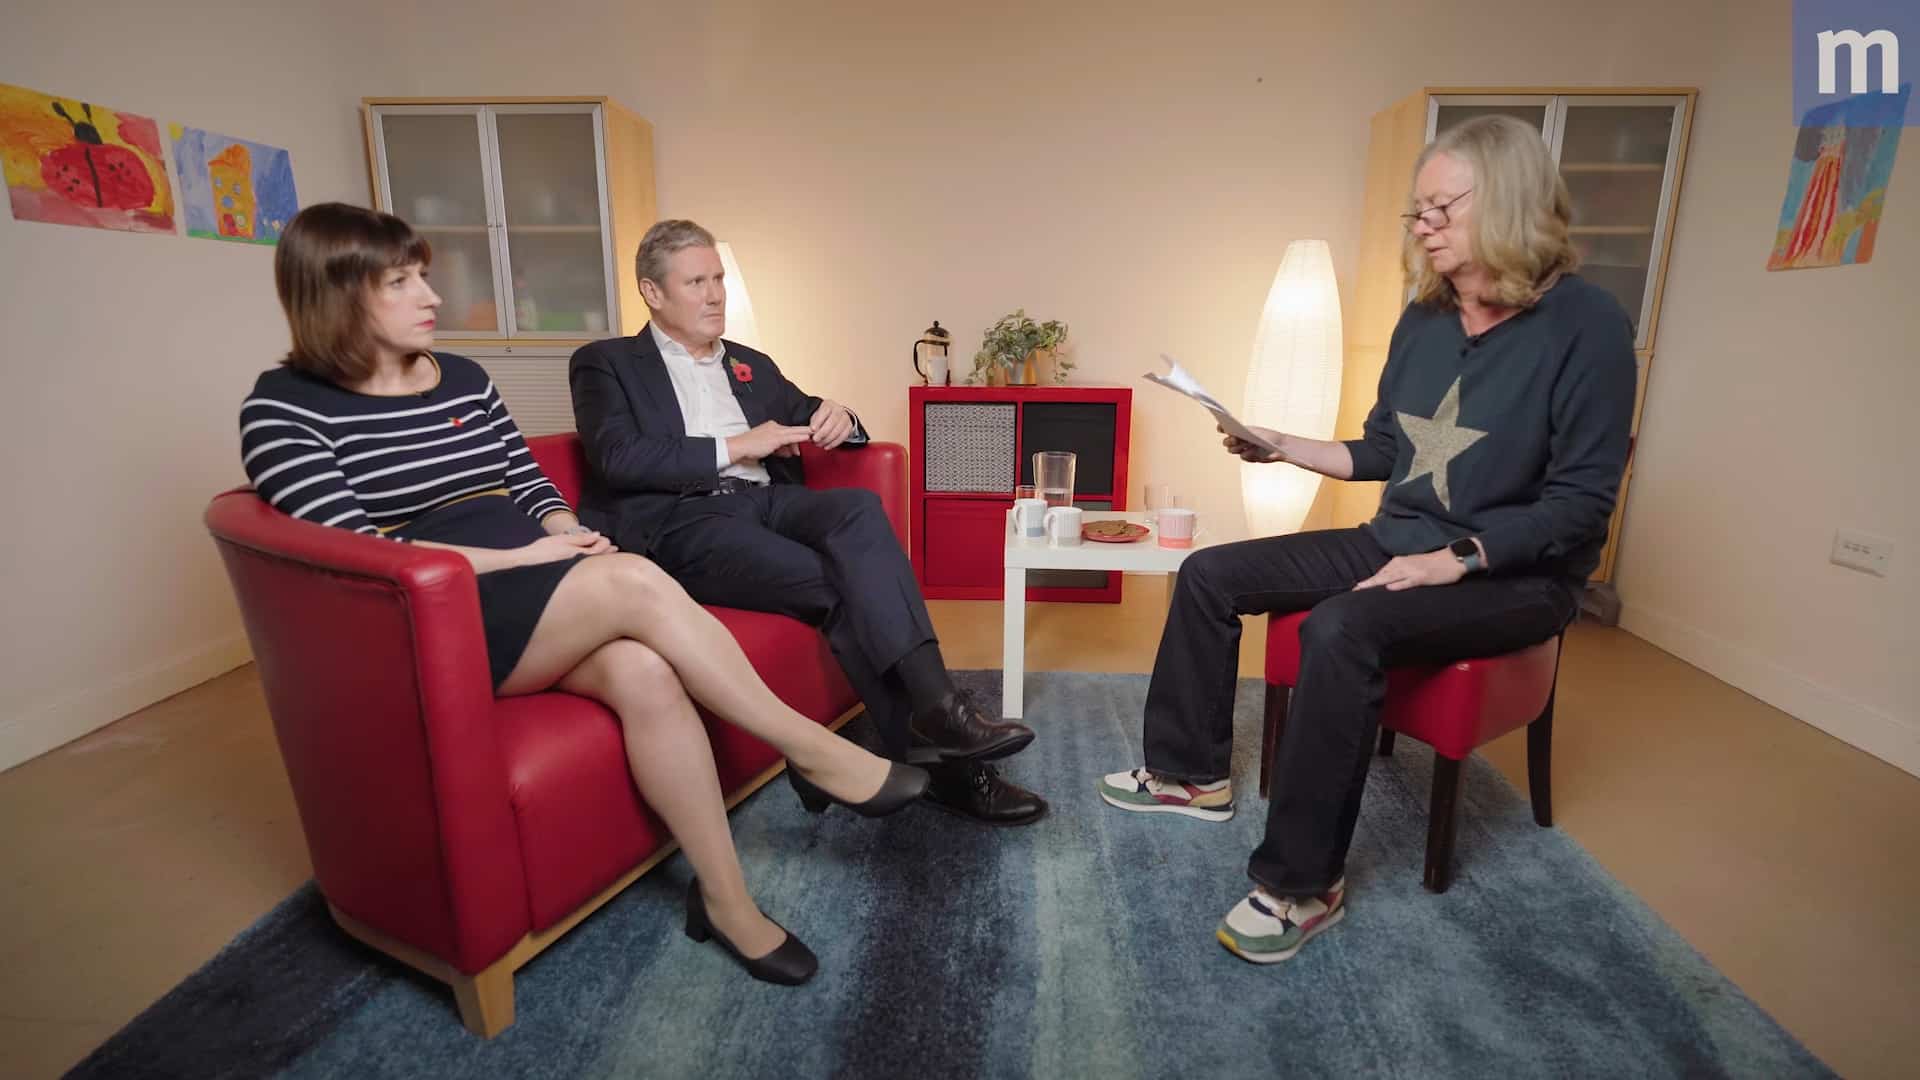 Bridget Phillipson and Keir Starmer speaking to Justine Roberts during a Mumsnet interview. 